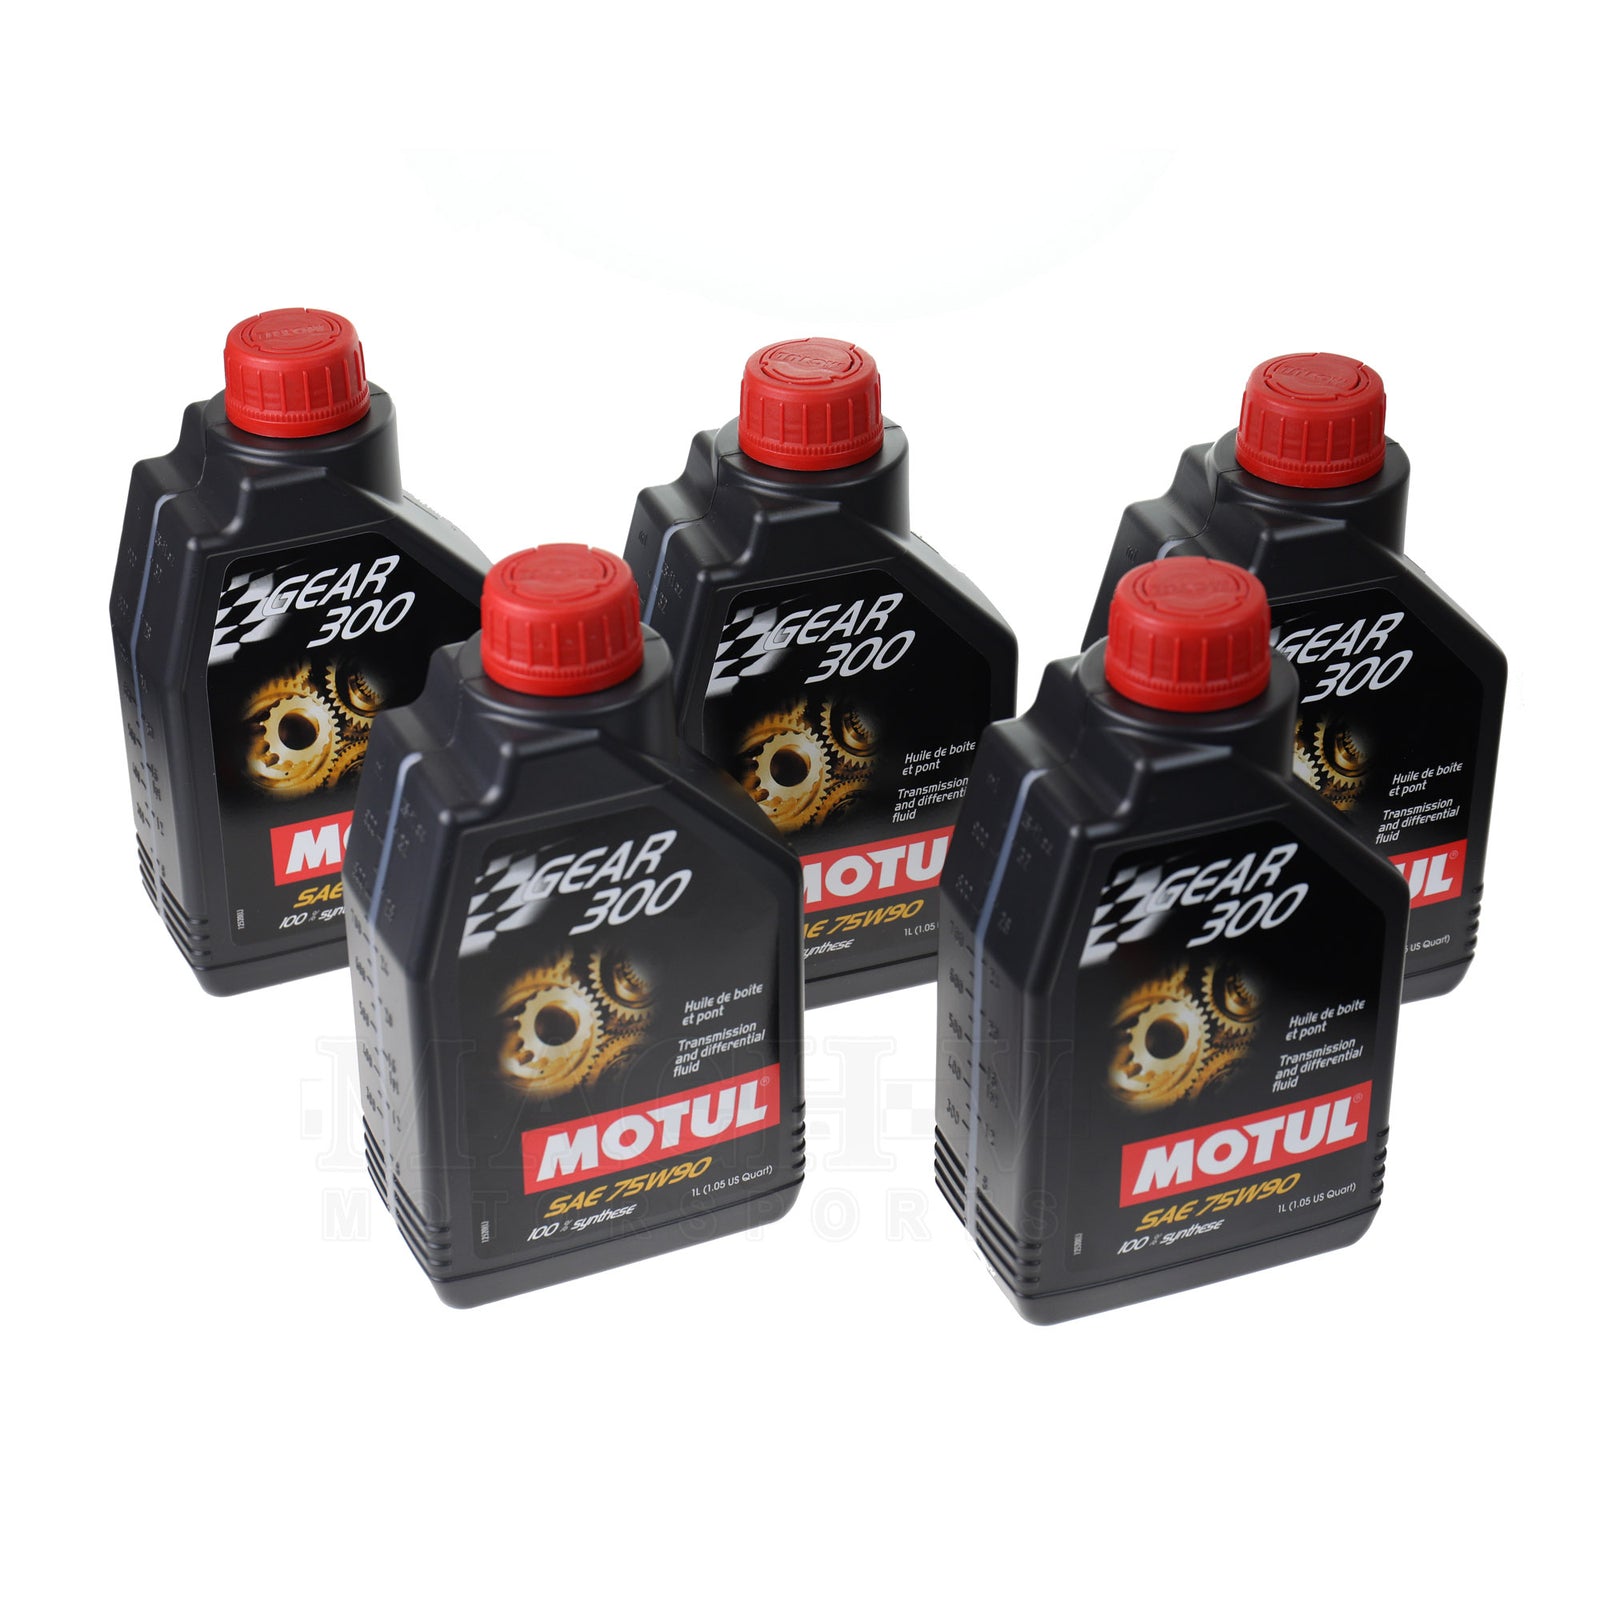 Motul Gear 300 75W90 Synthetic Transmission and Differential Fluid - Liter  - 2 Pack